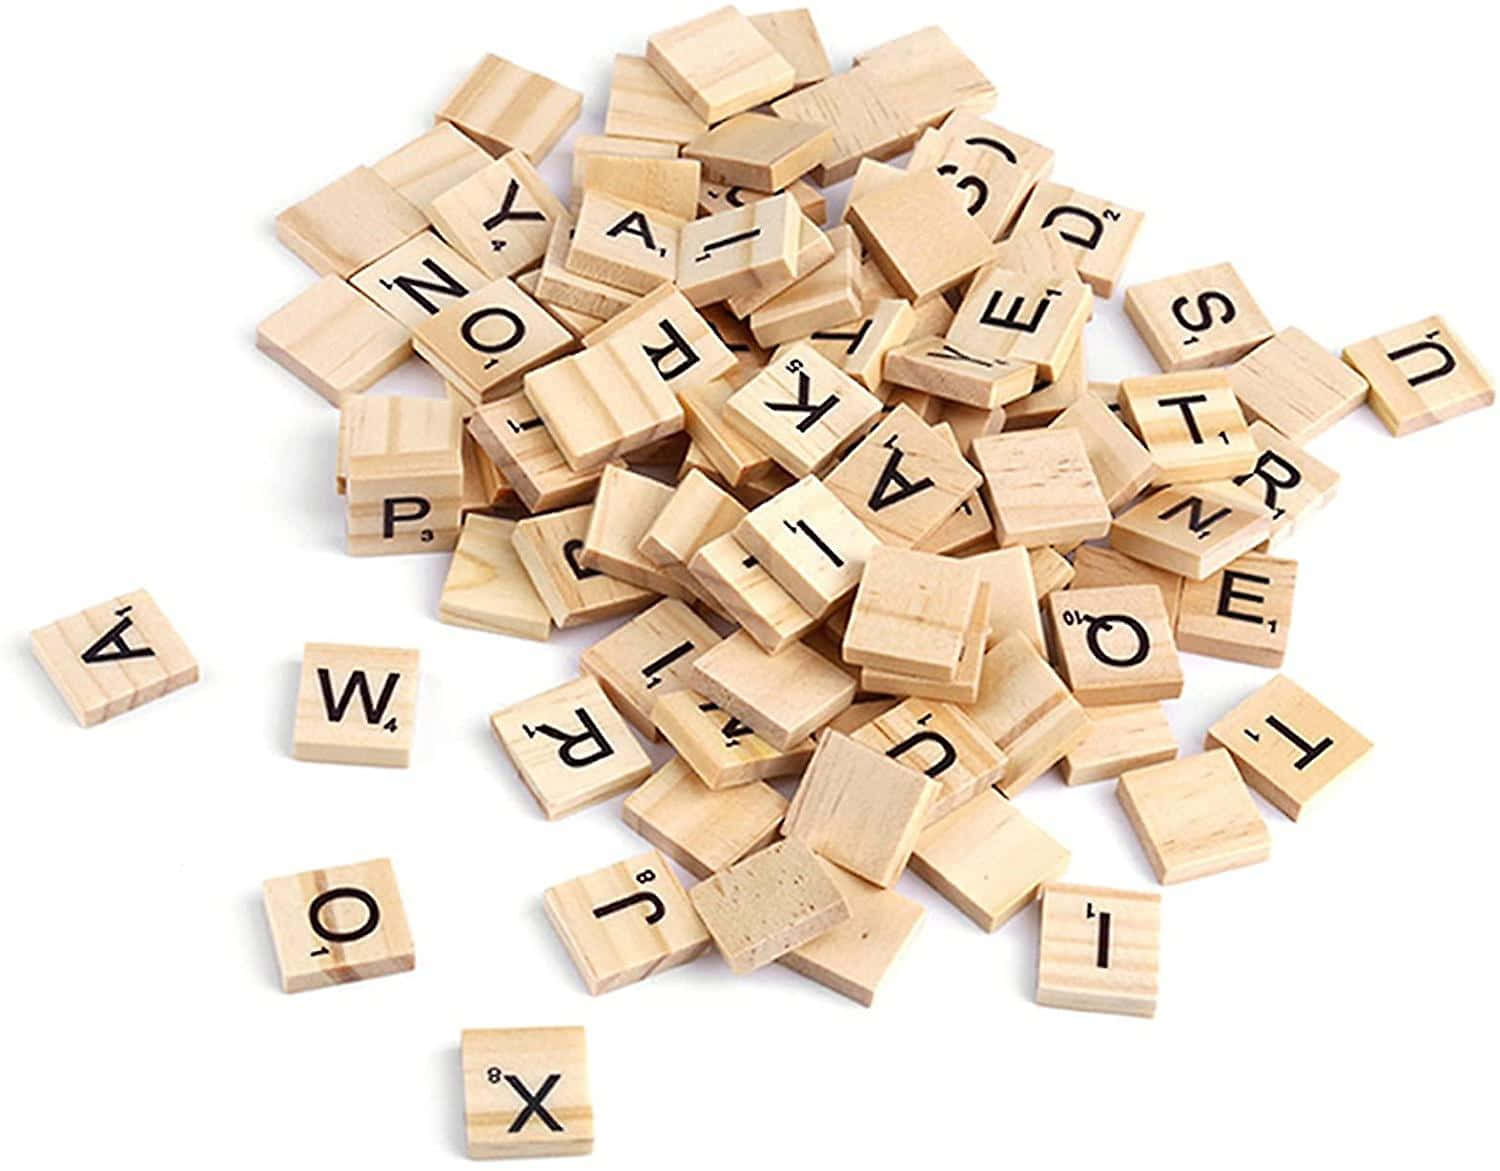 A Pile Of Wooden Letters And Numbers